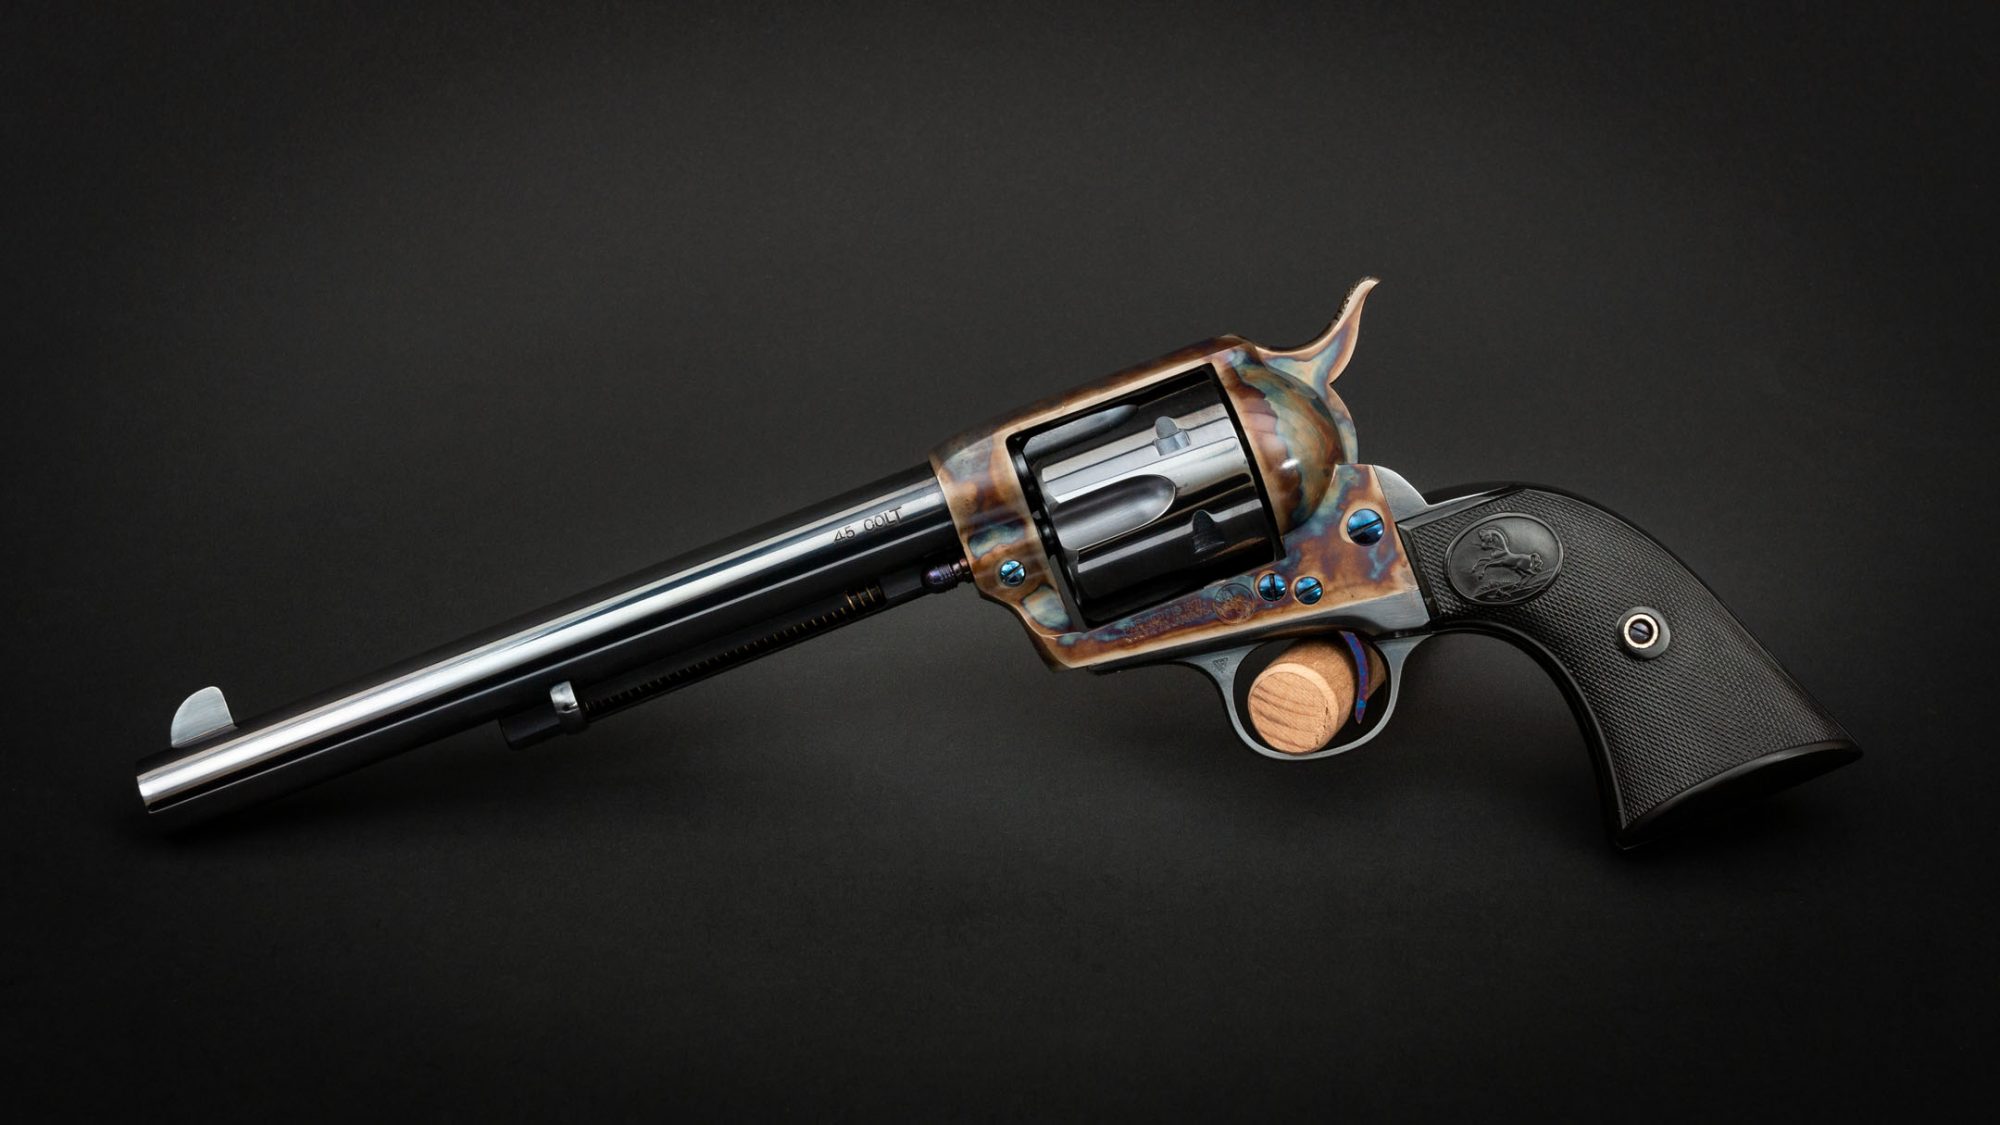 Colt SAA revolver from 1902, restored by Turnbull Restoration Co. in 2000, and now offered for sale in our Bloomfield, NY showroom